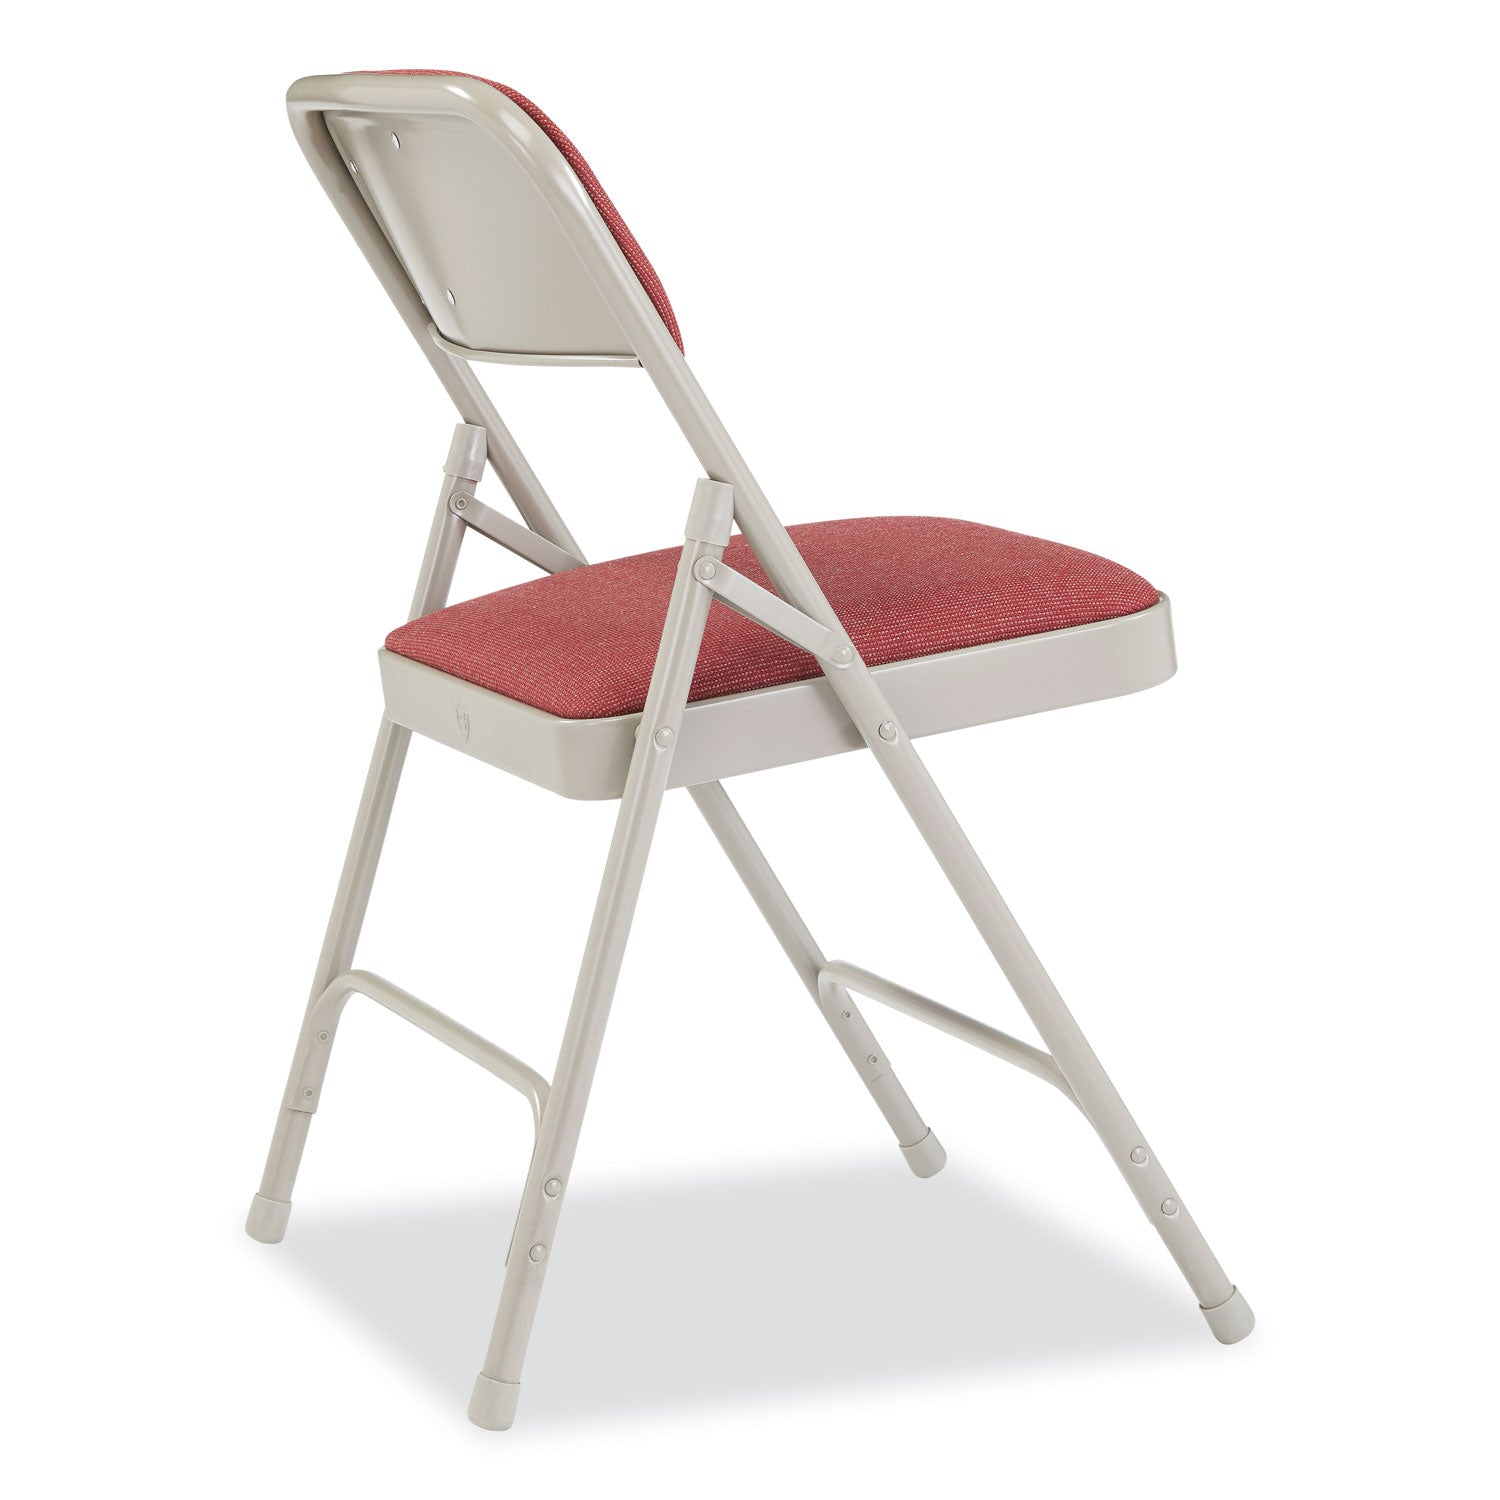 2200-series-fabric-dual-hinge-premium-folding-chair-supports-500lb-cabernet-seat-backgray-base4-ct-ships-in-1-3-bus-days_nps2208 - 4